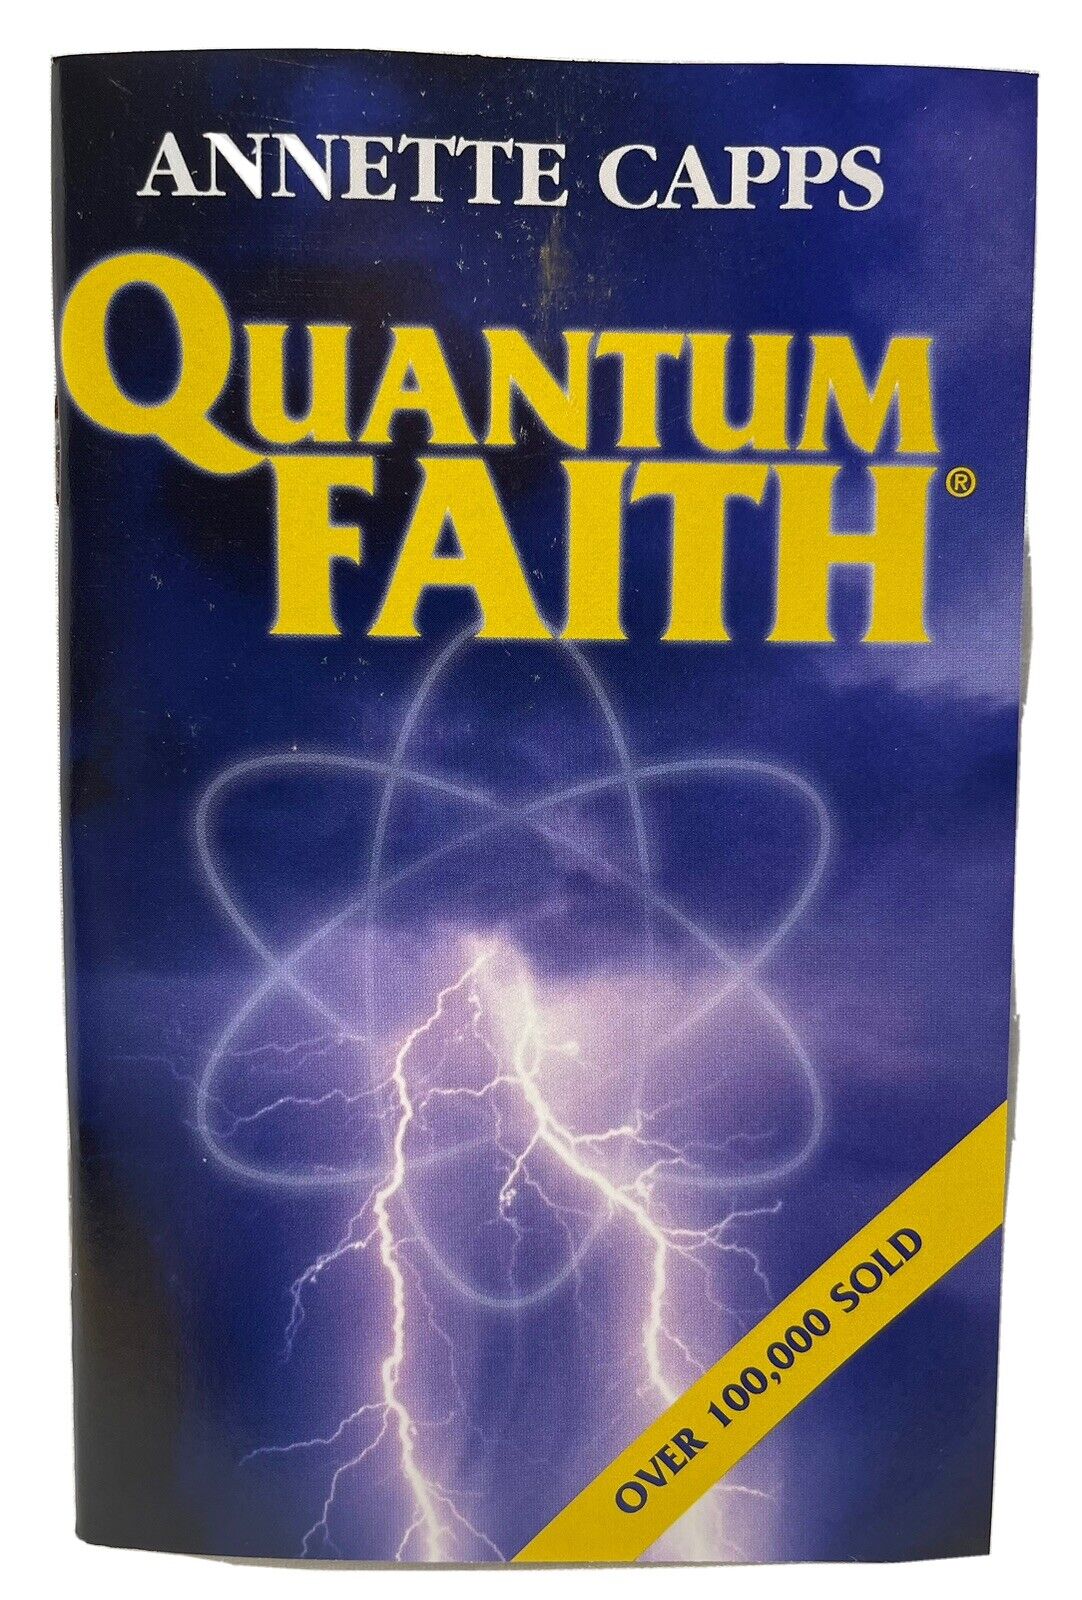 Quantum Faith How Does quantum physics relate to the Bible? Annette Capps